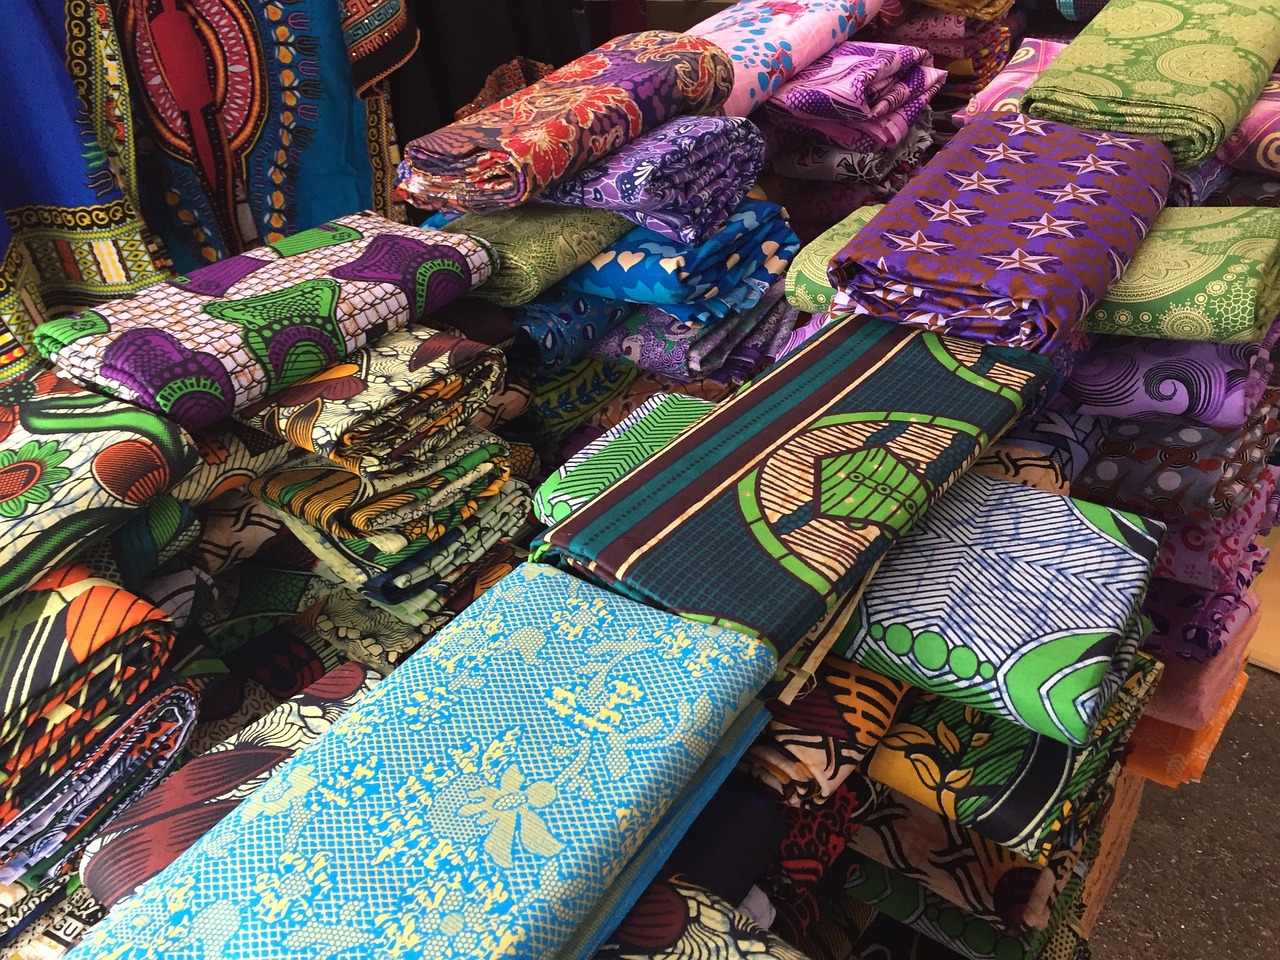 A variety of local textiles for sale at the market